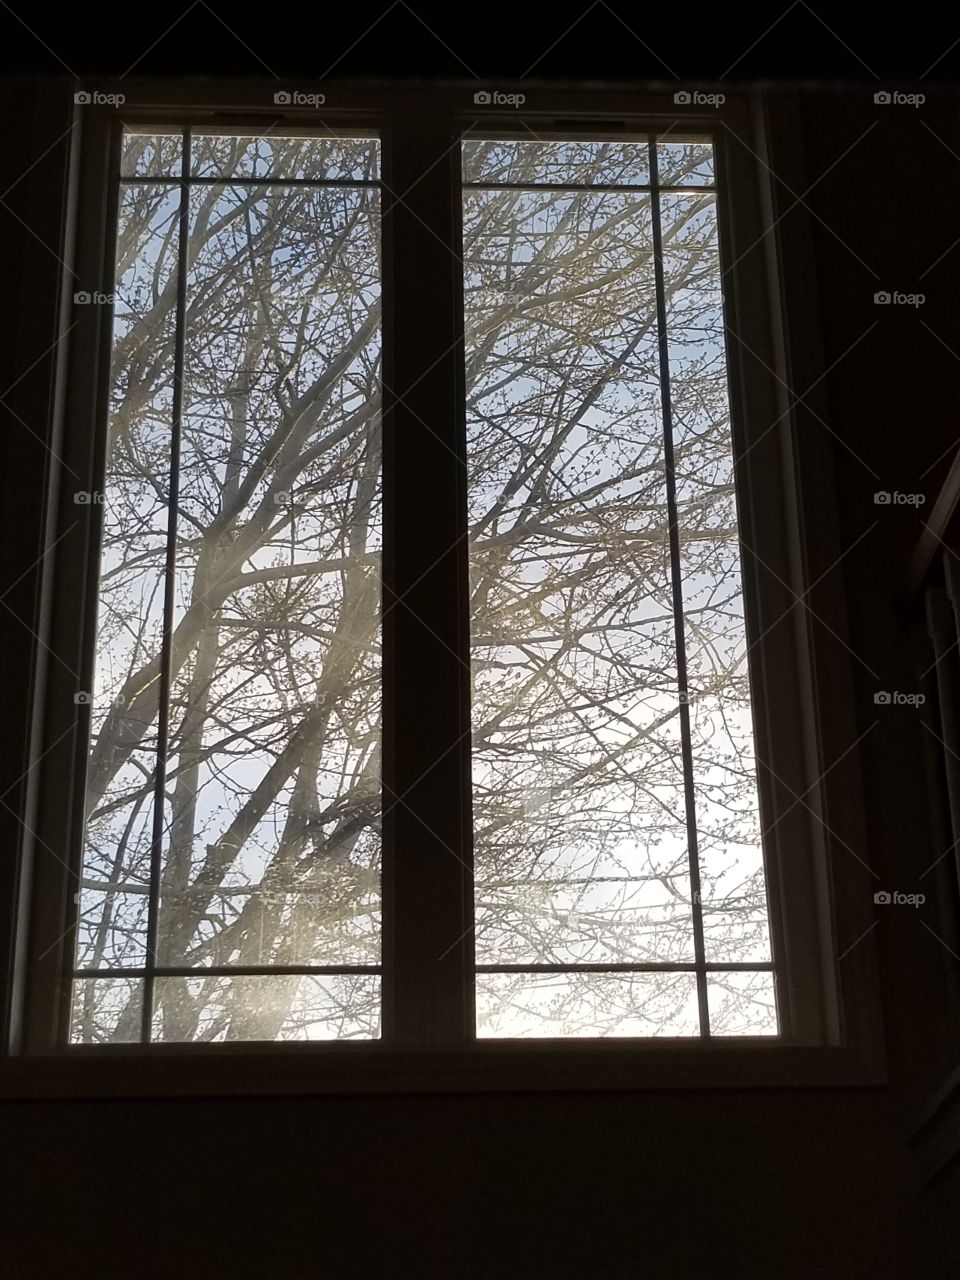 budding trees in the glow of a large spring day as seen from a comfy recliner,  soaking up every minute of this day